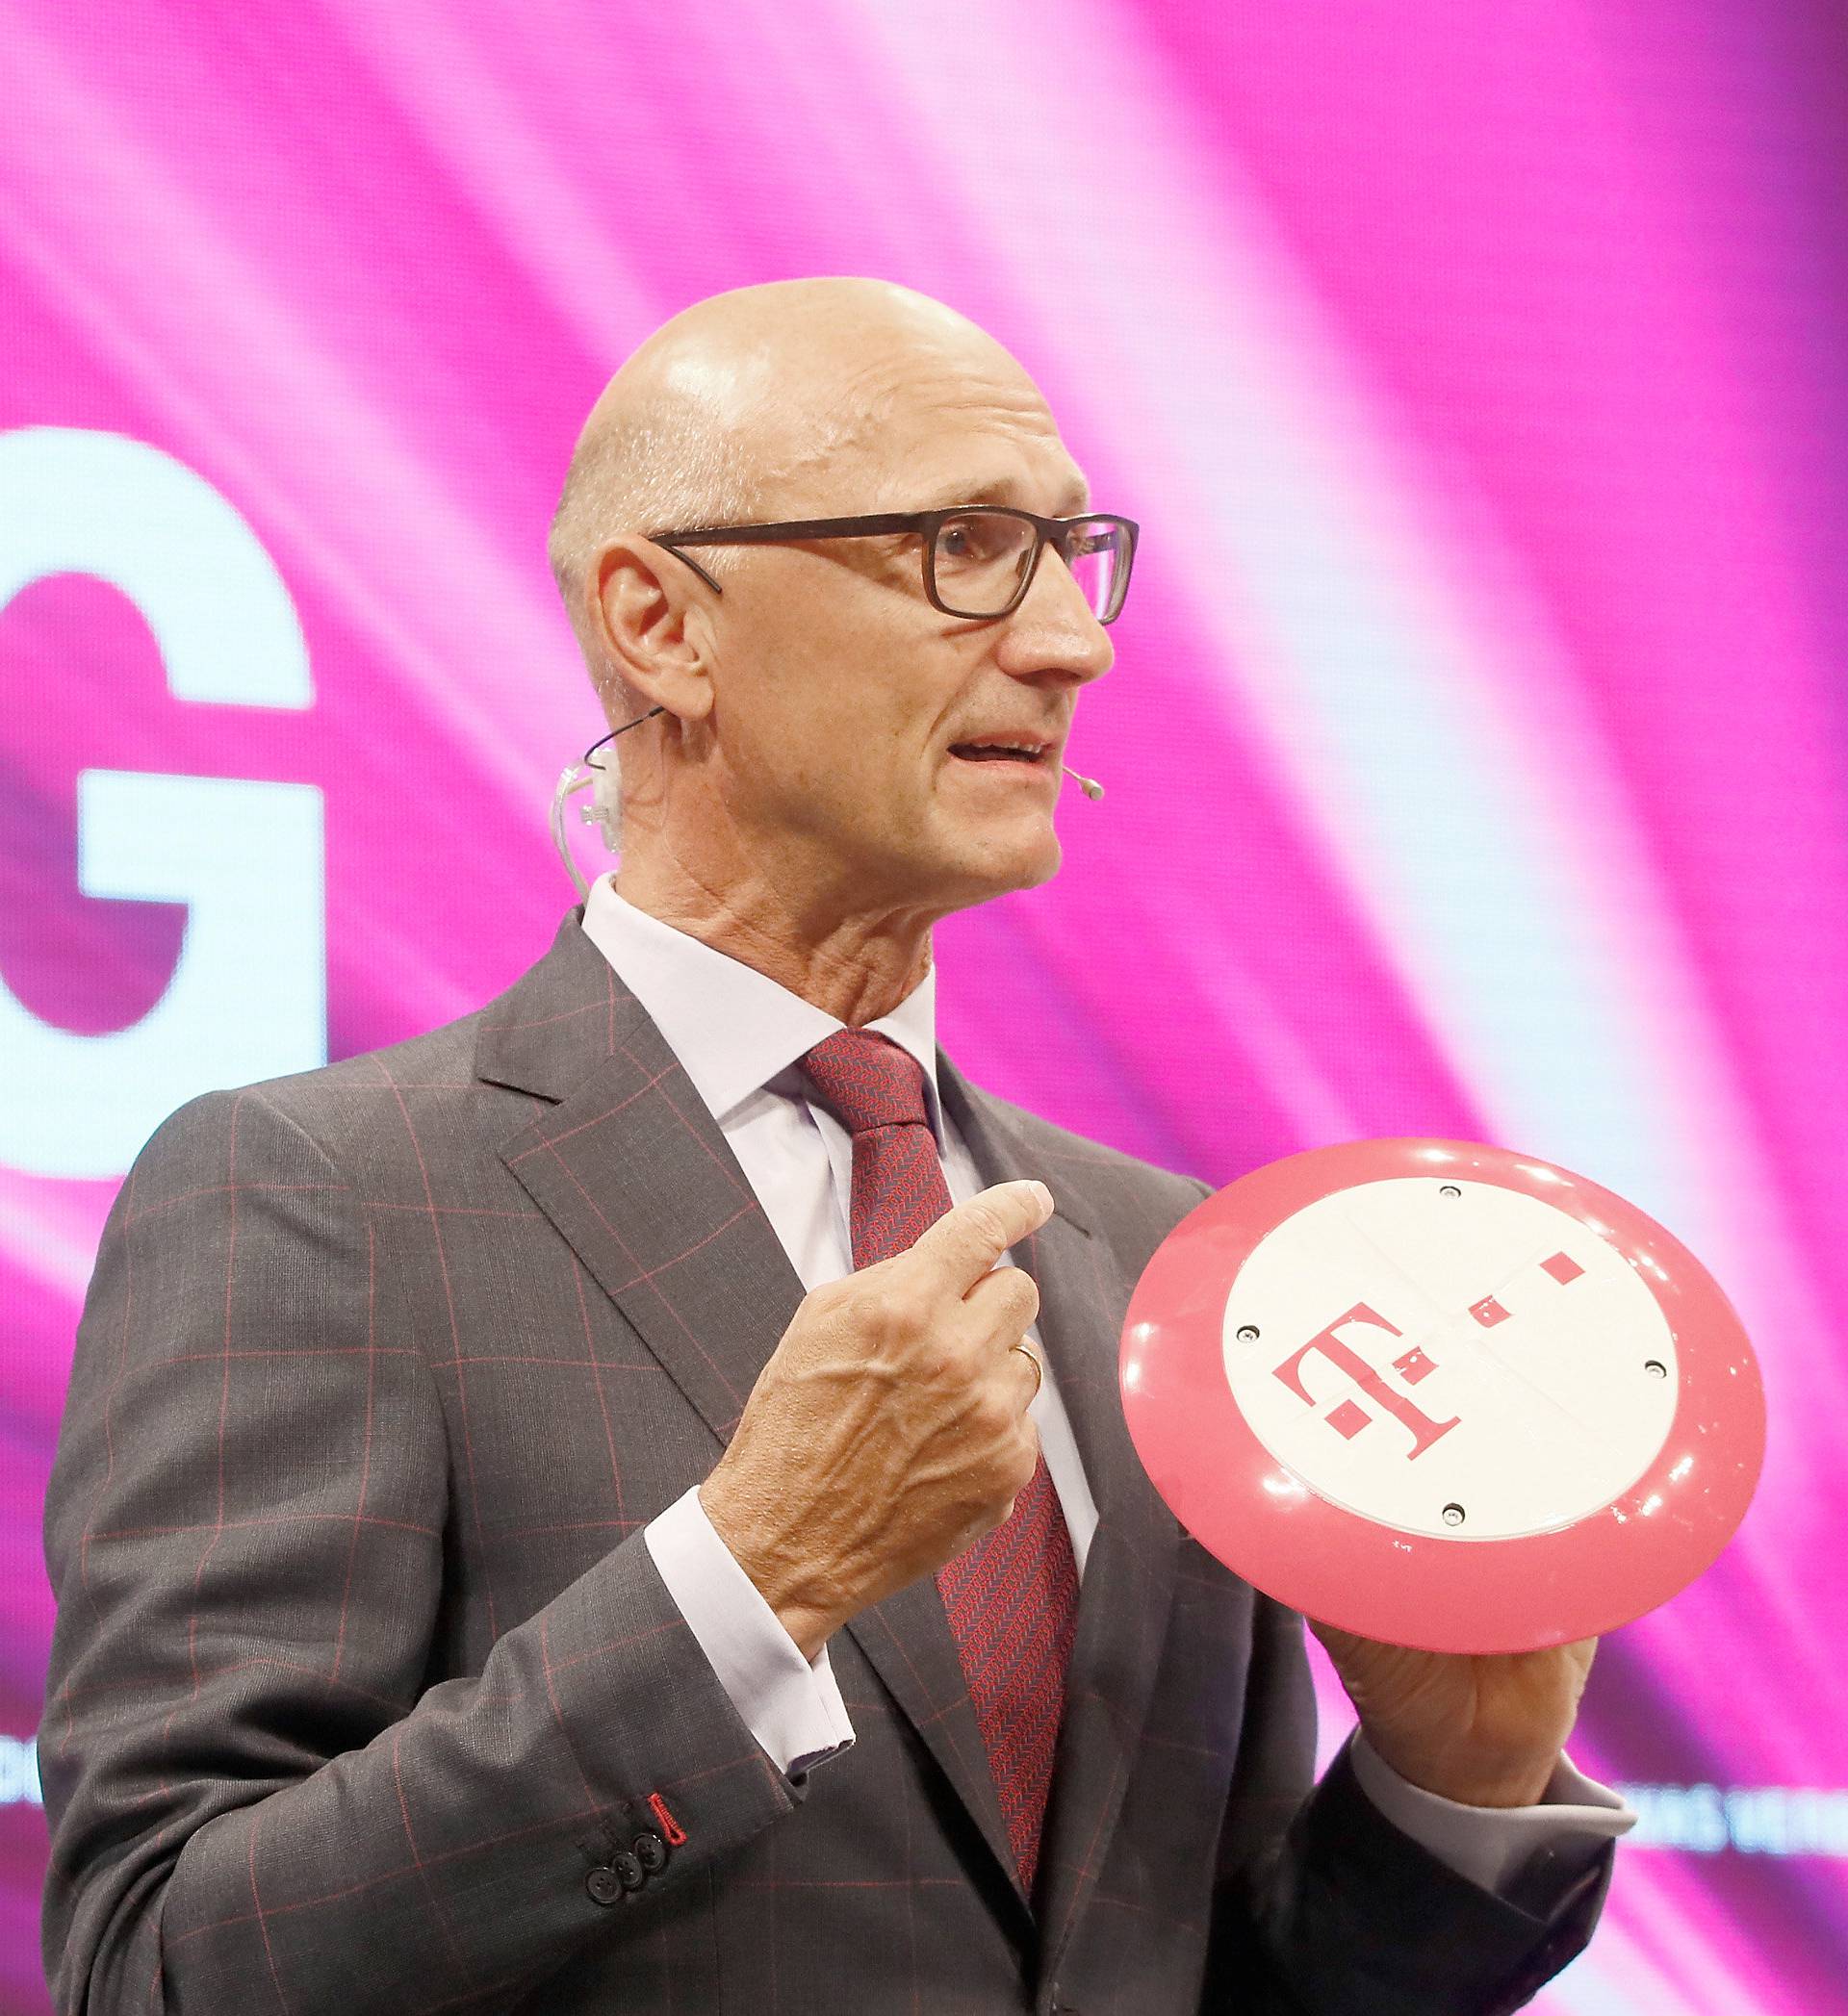 FILE PHOTO:Hoettges, CEO of Germany's Deutsche Telekom AG, attends the company's annual shareholder meeting in Cologne